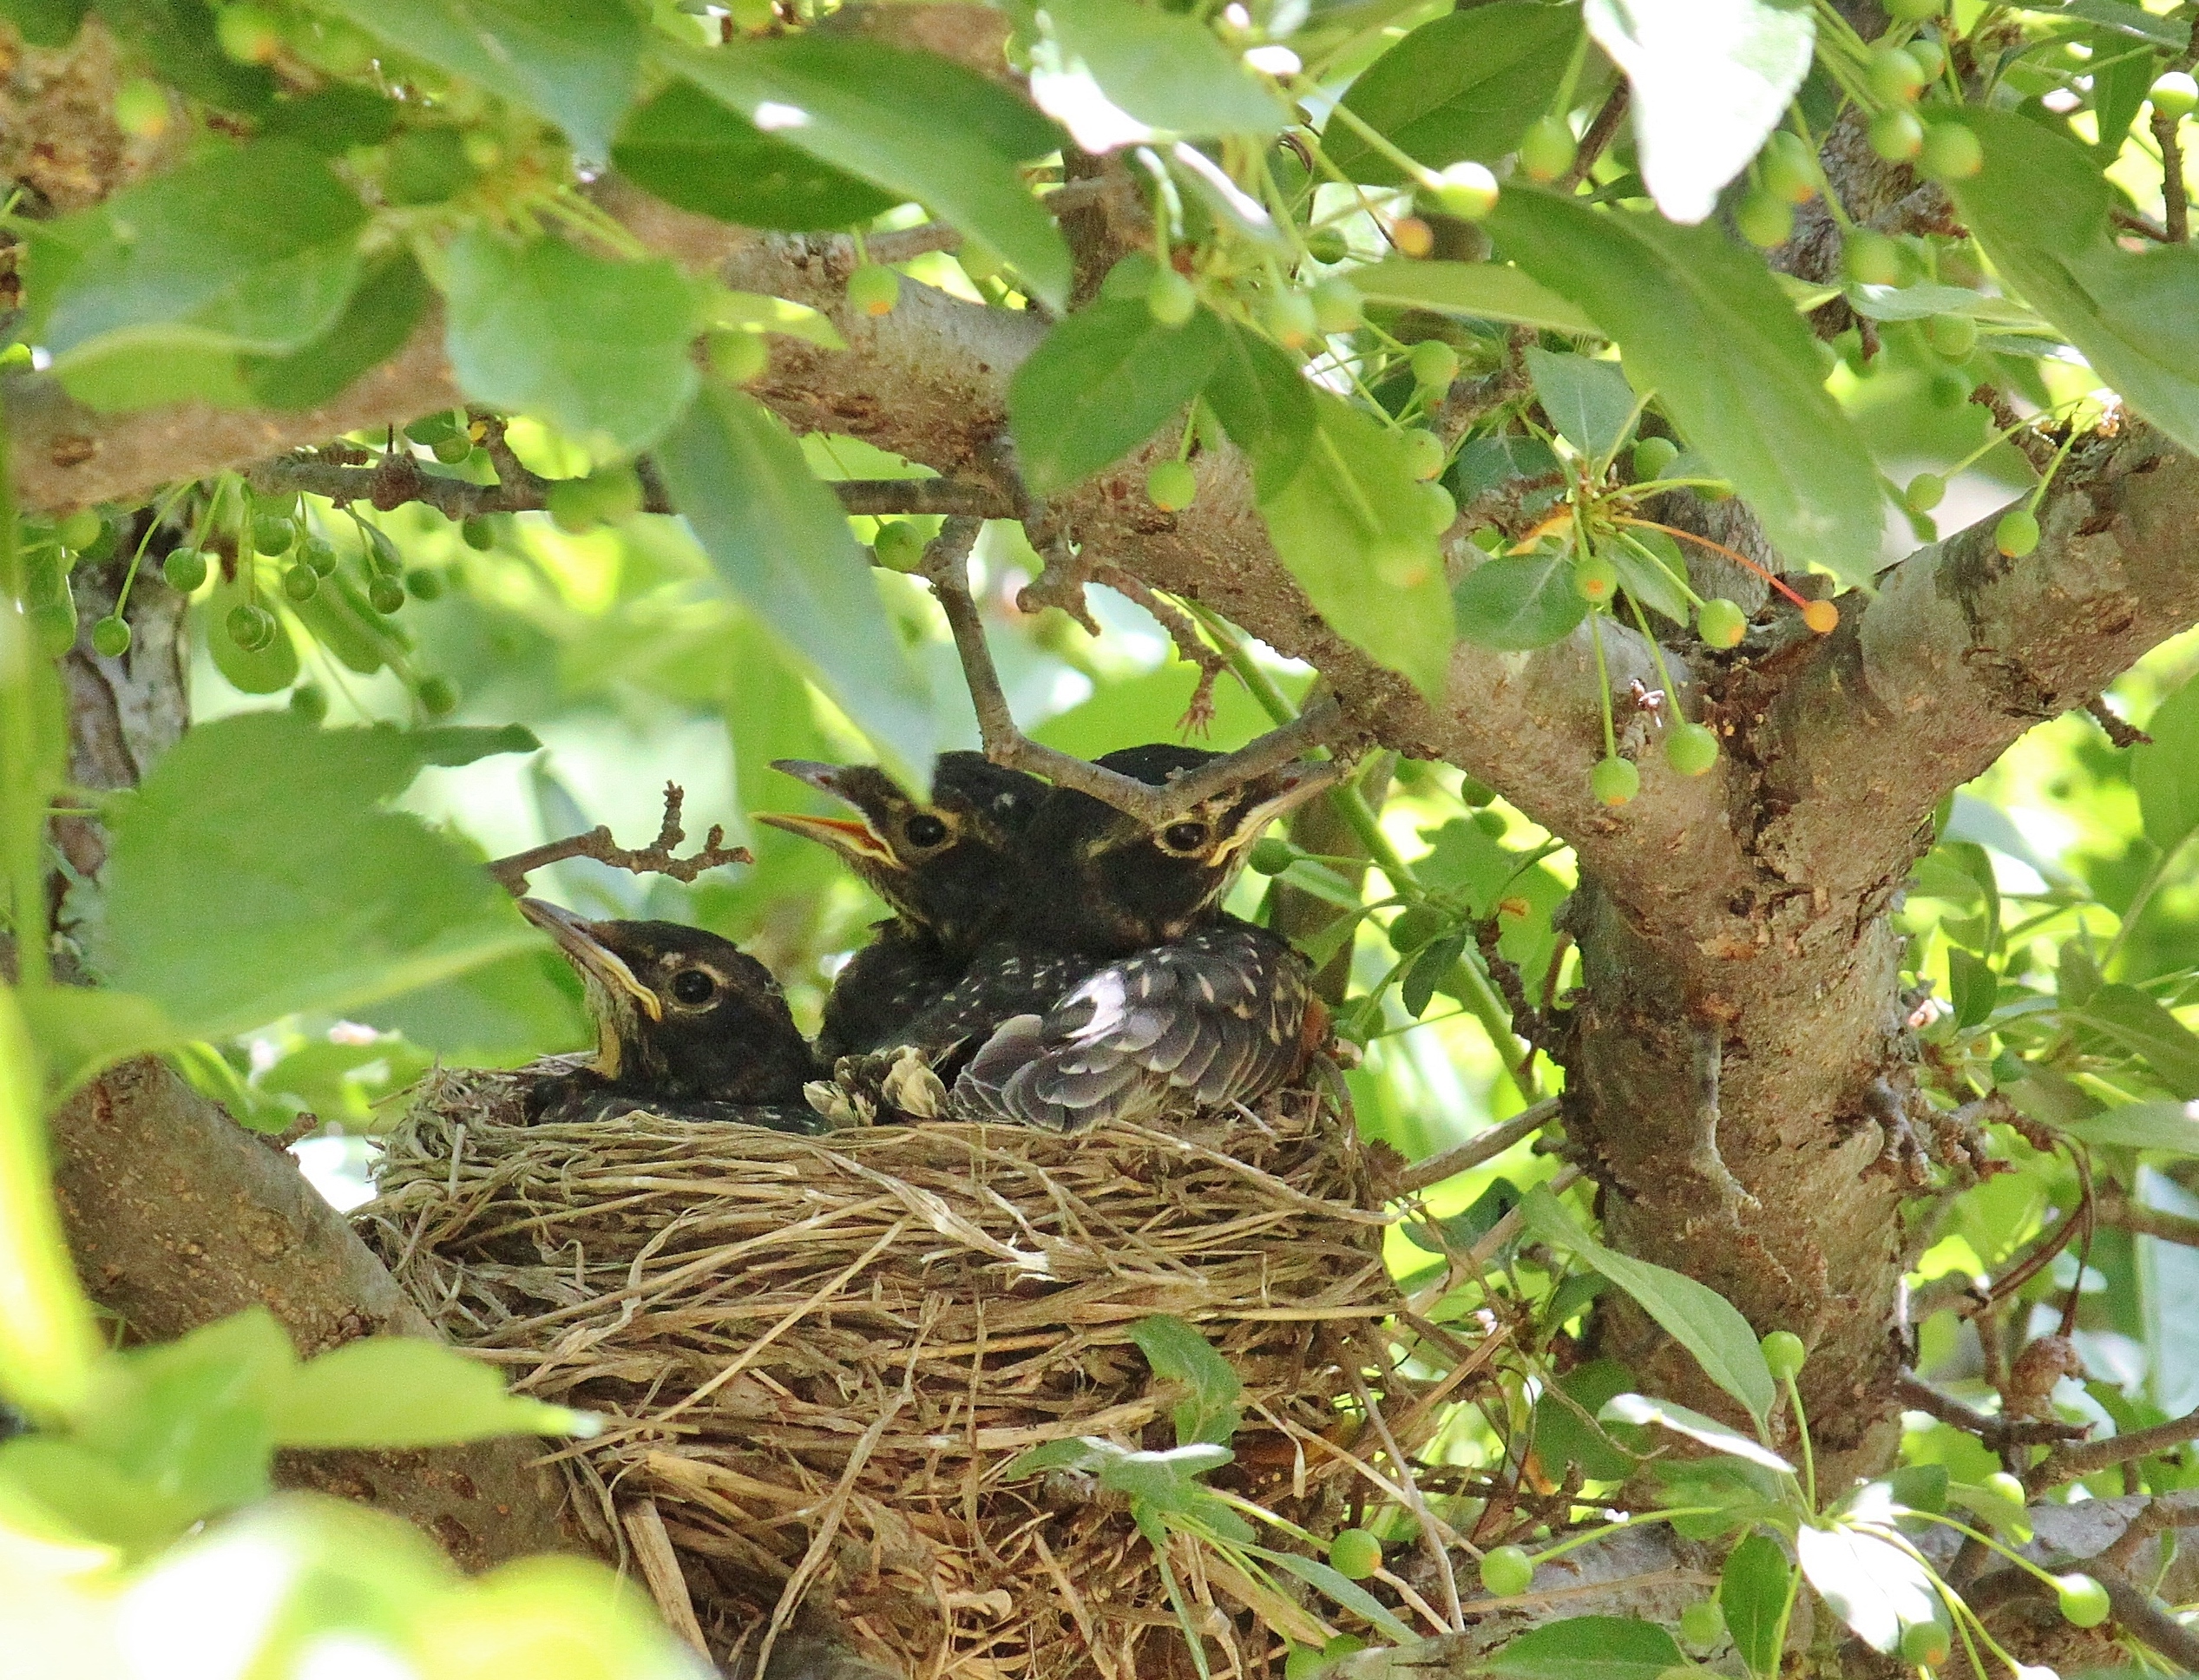 american robins nesting. Three nestlings almost ready to fledge.